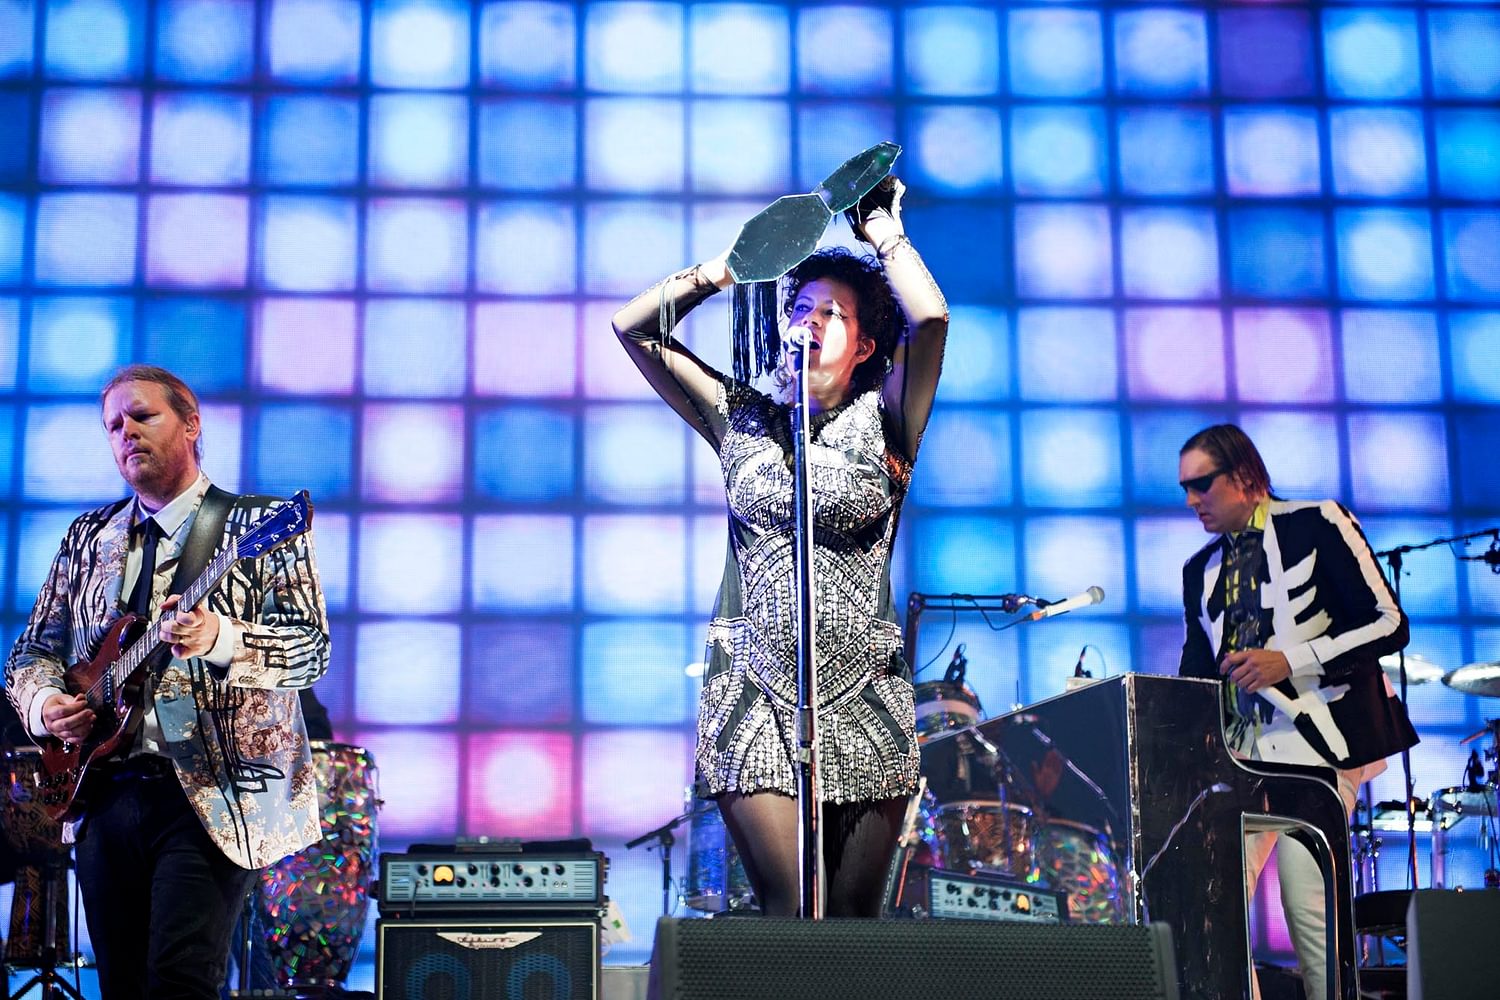 Watch Arcade Fire cover Feist's 'I Feel It All' at Calgary show